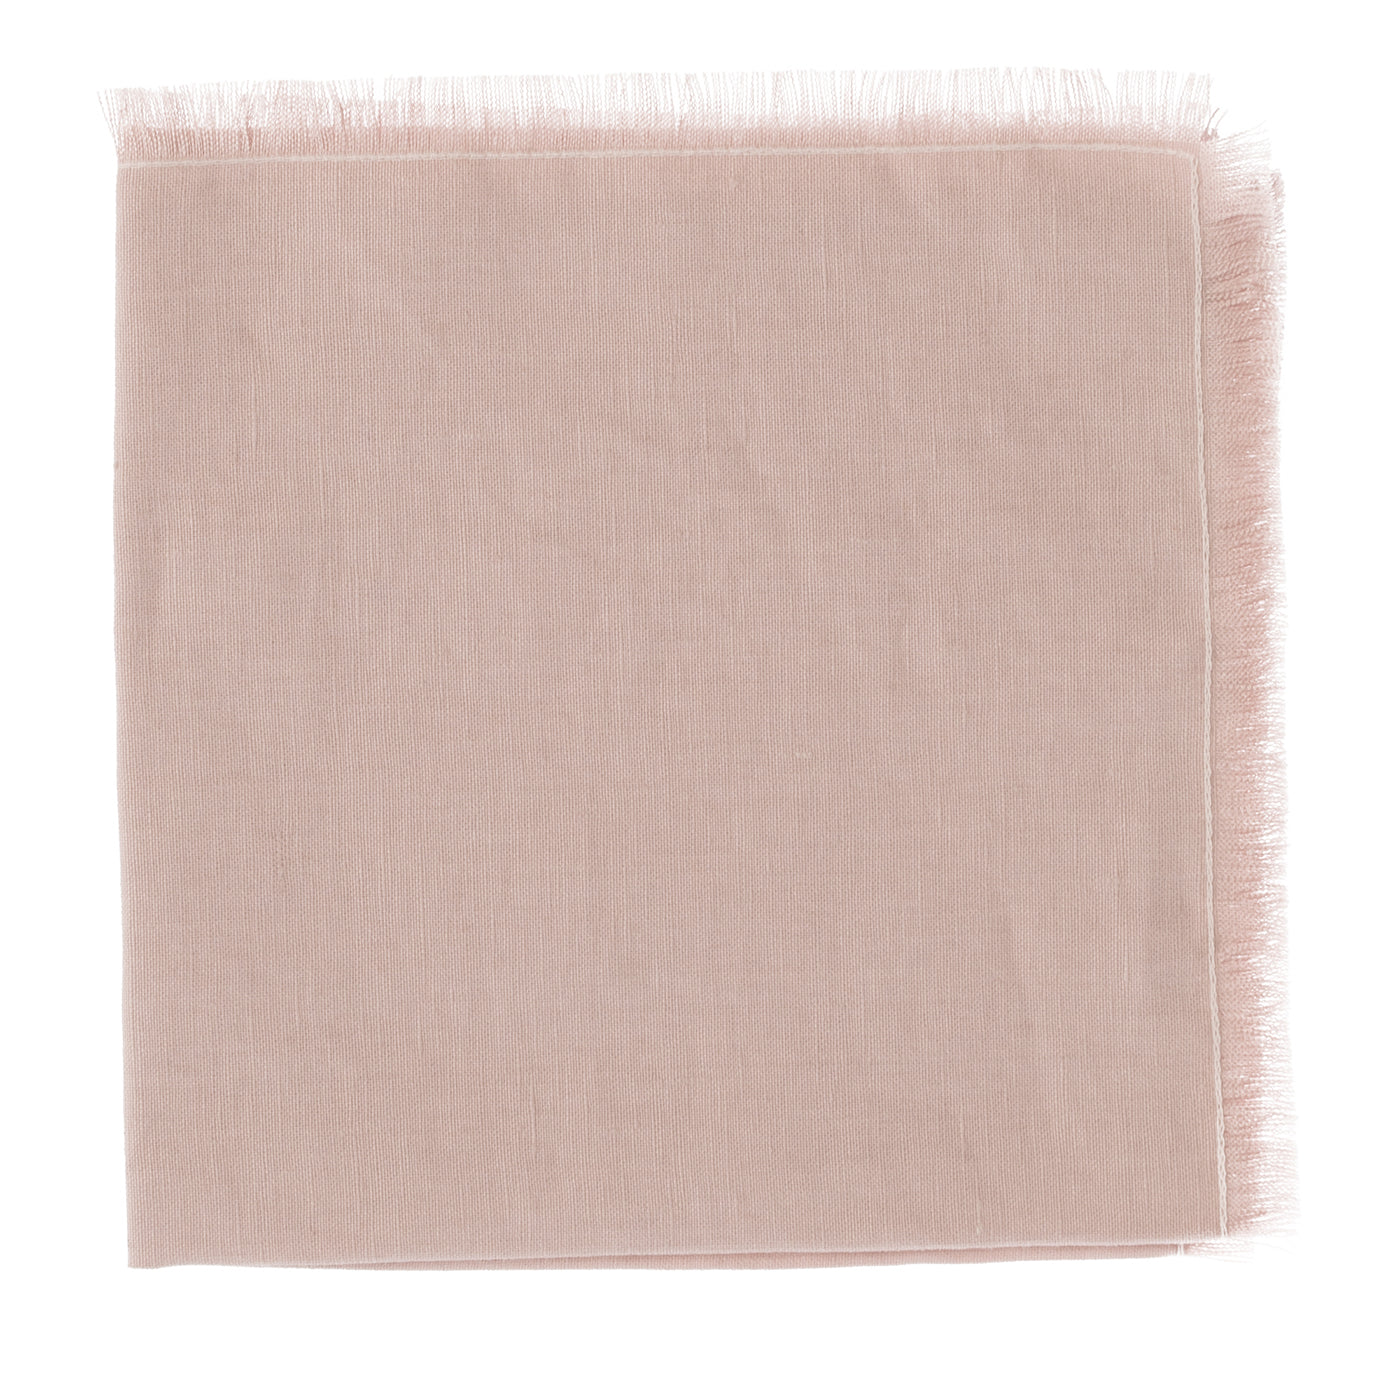  Set of 4 Luxury Hand-Fringed Silver-Pink Pure Linen Napkins - Main view